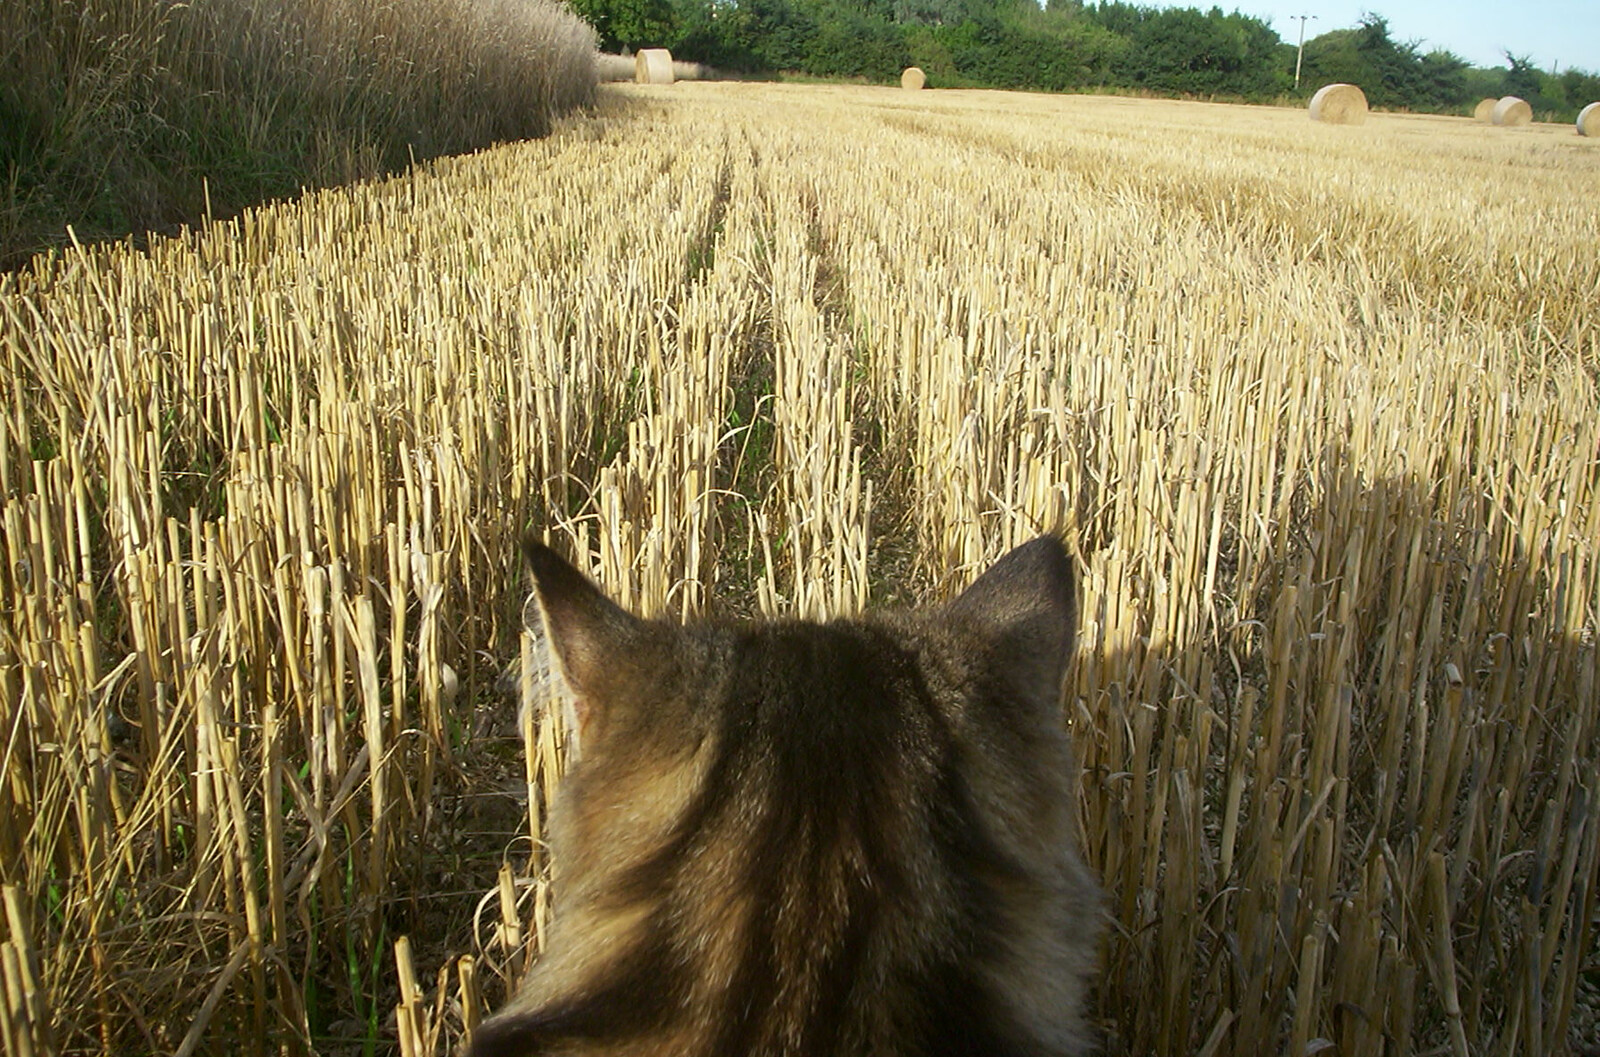 A cat's eye view of the stubble field from Alan gets a Cherry Picker, Brome, Suffolk - 2nd August 2002